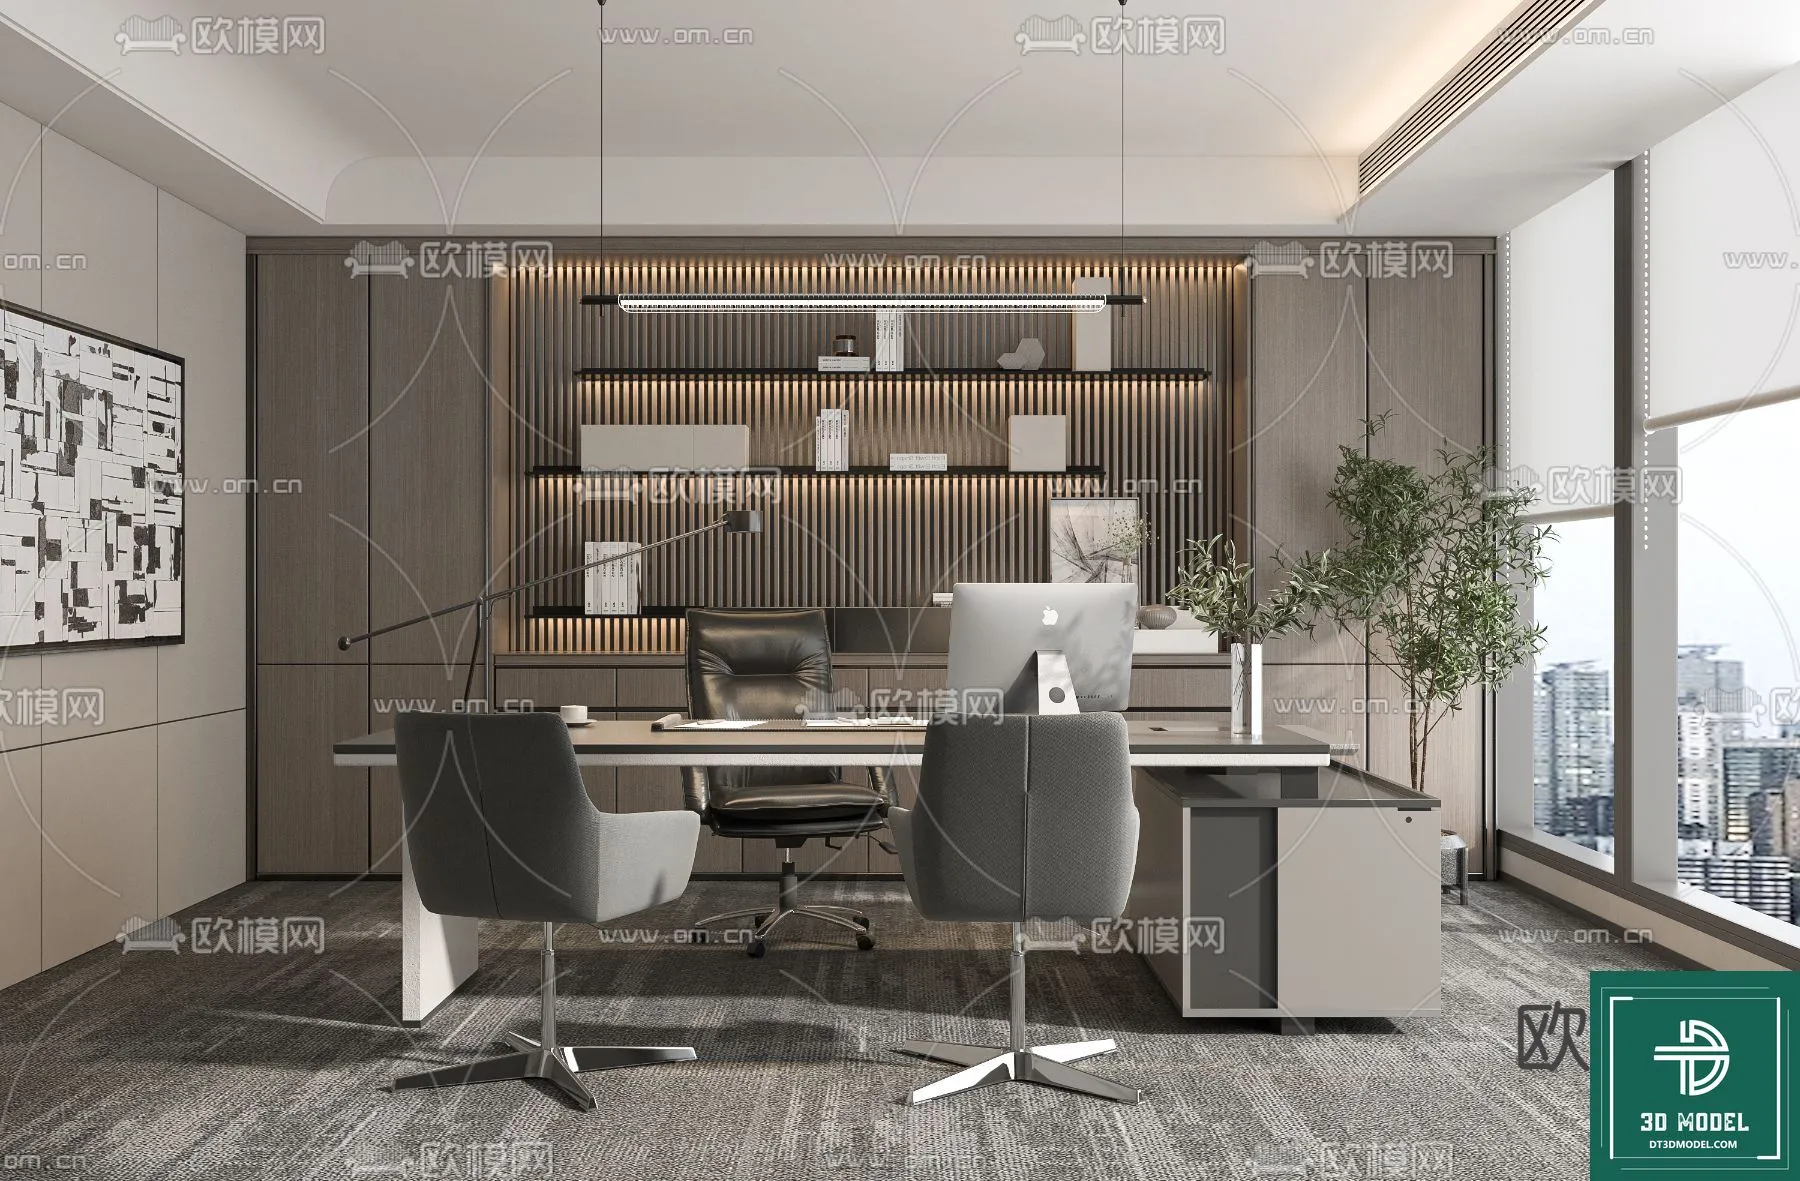 OFFICE ROOM FOR MANAGER – 3DMODEL – 092